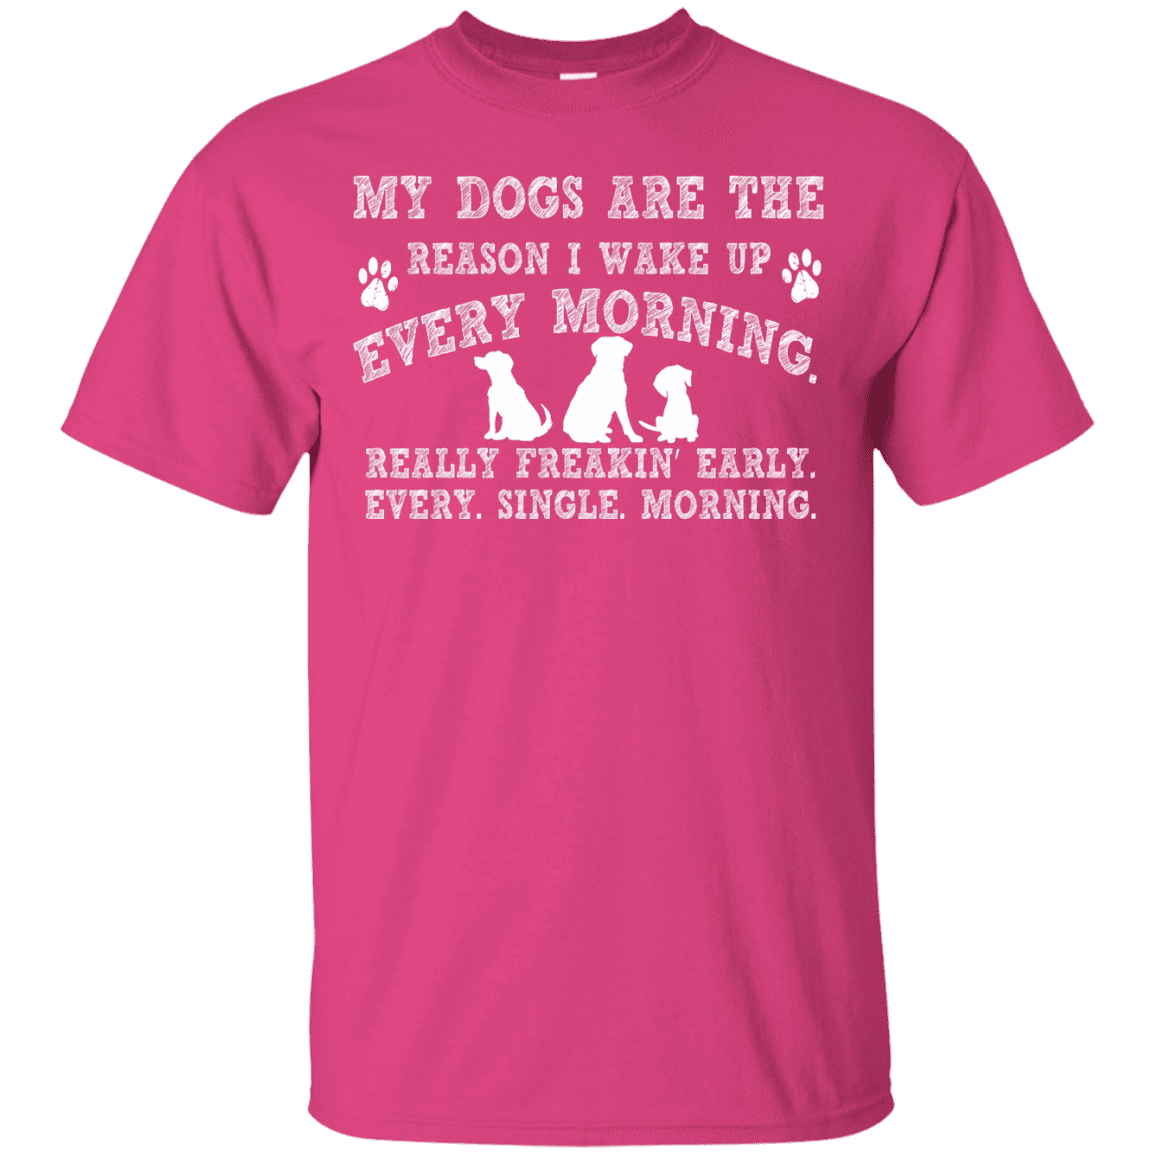 My Dogs Are The Reason - T Shirt.